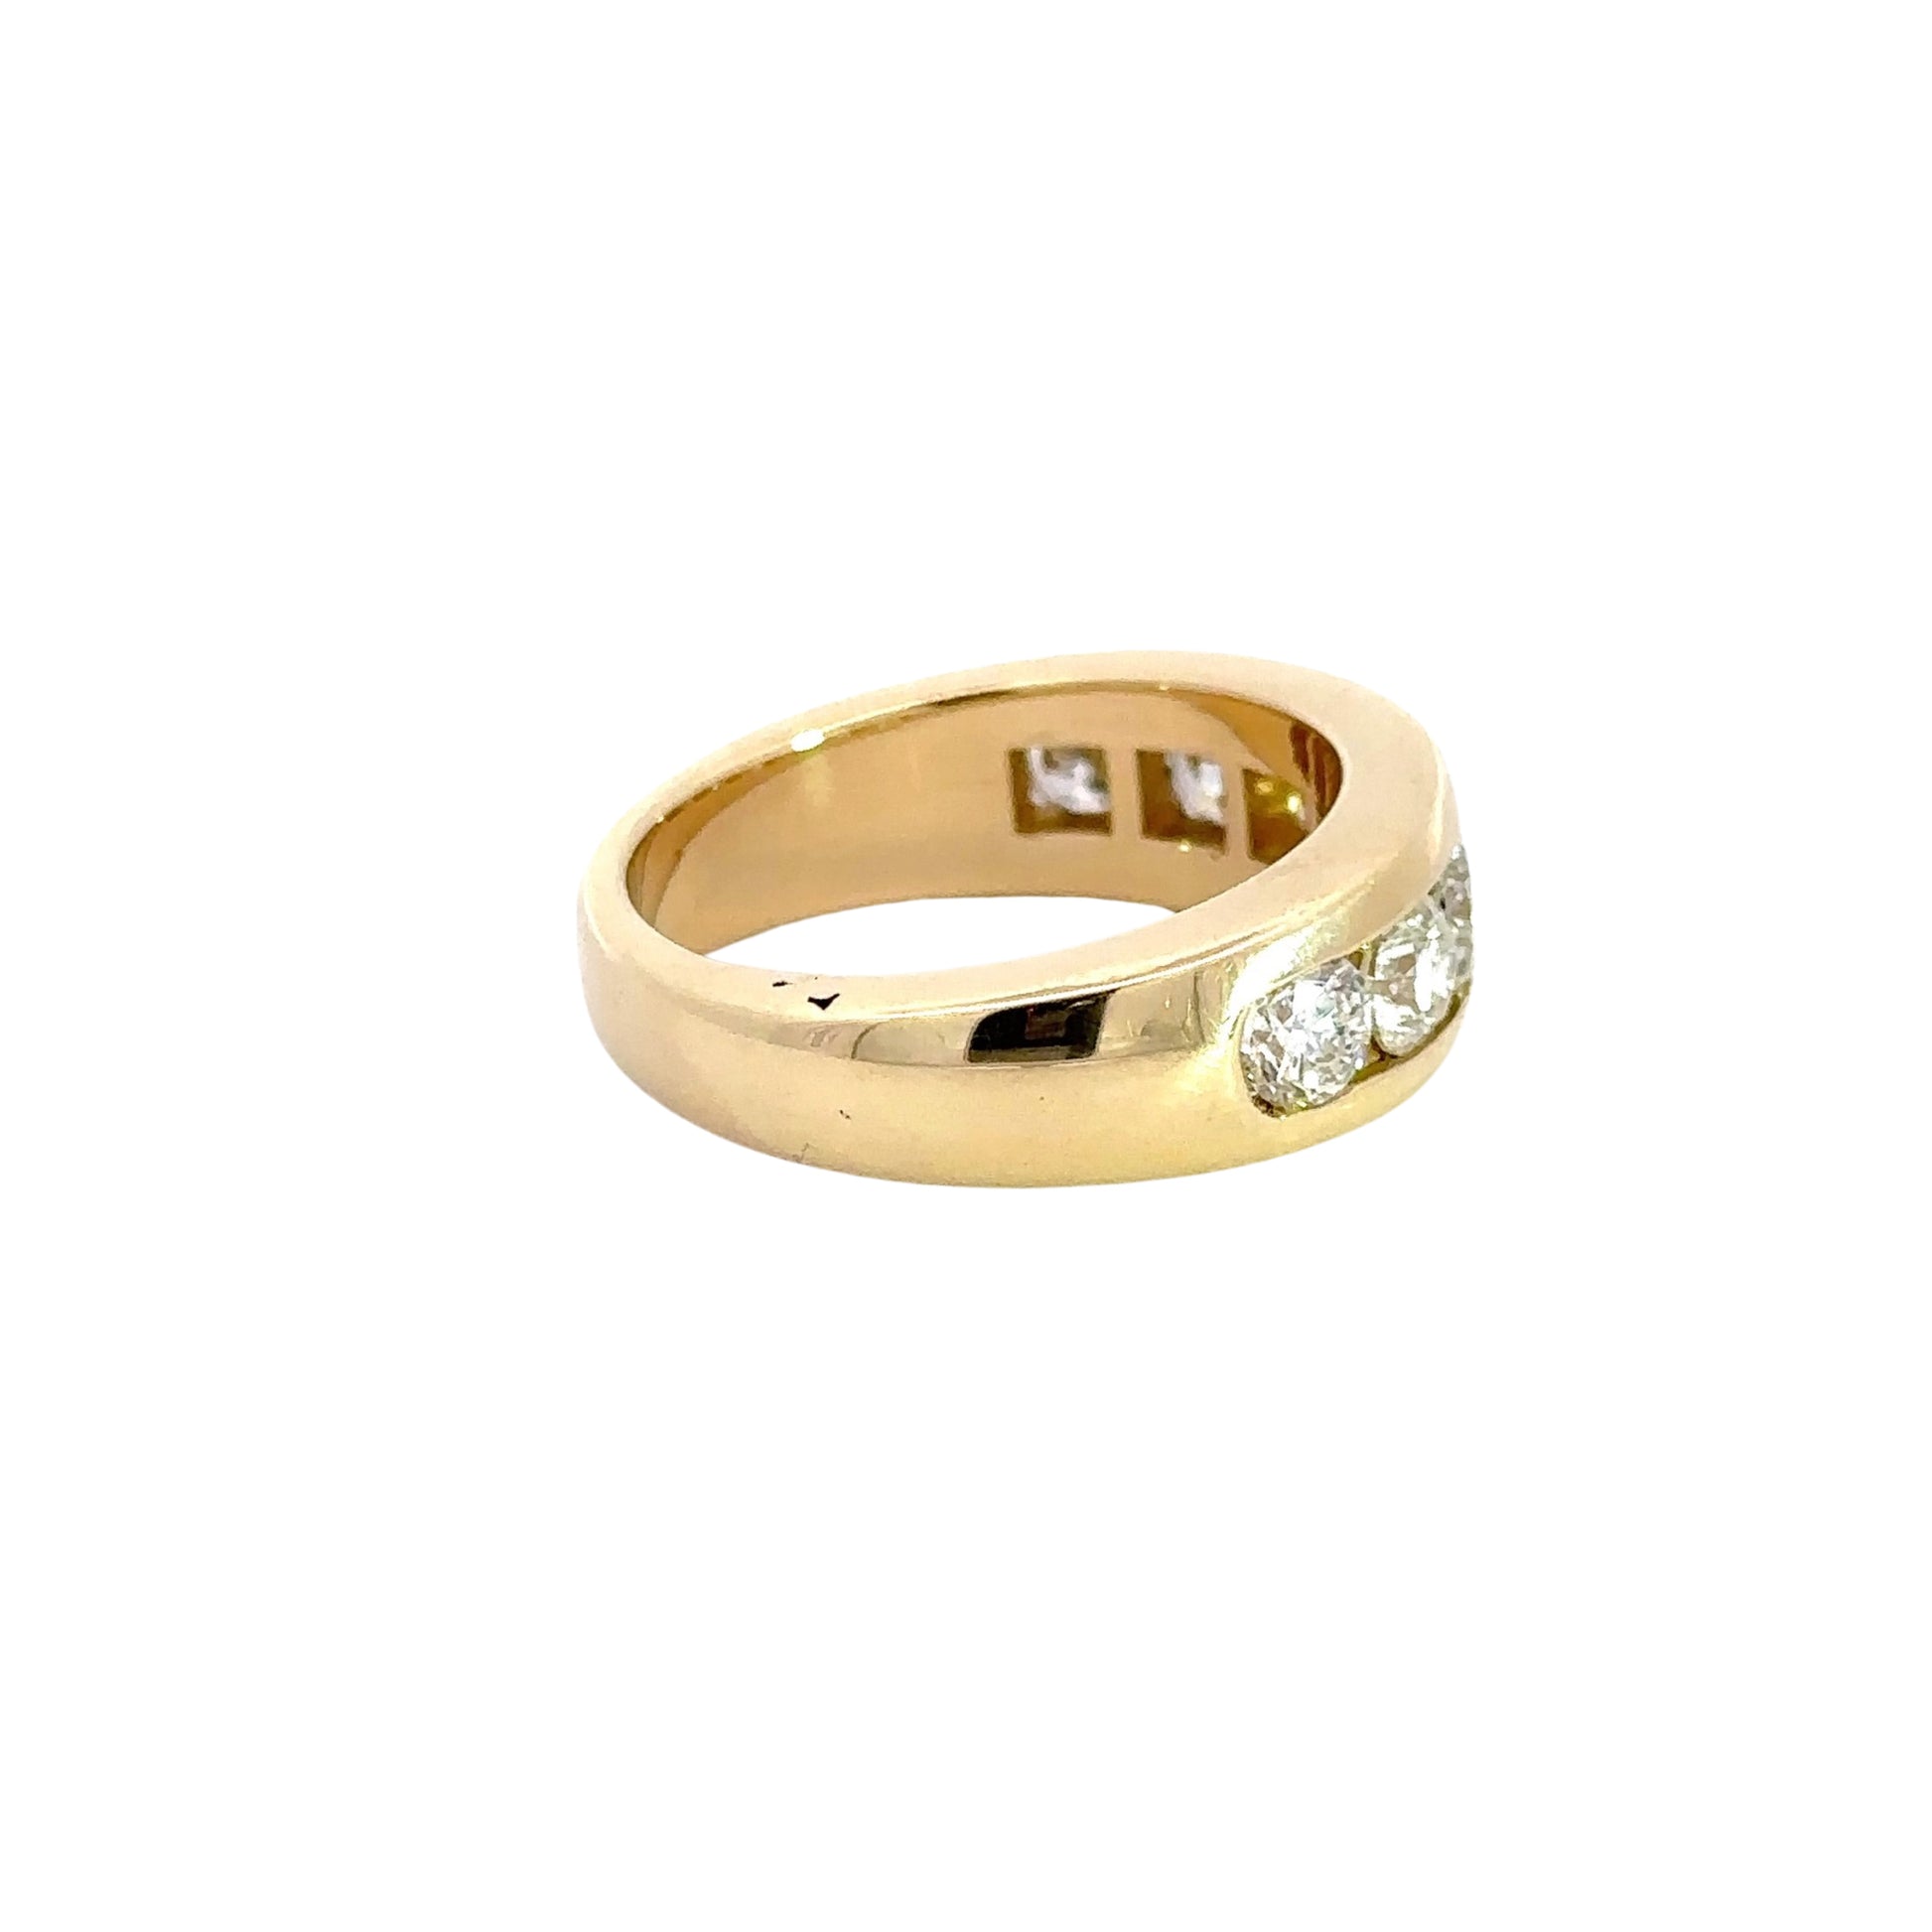 Shows side of 14k yellow gold diamond men’s band ring. Shows scratches in gold 